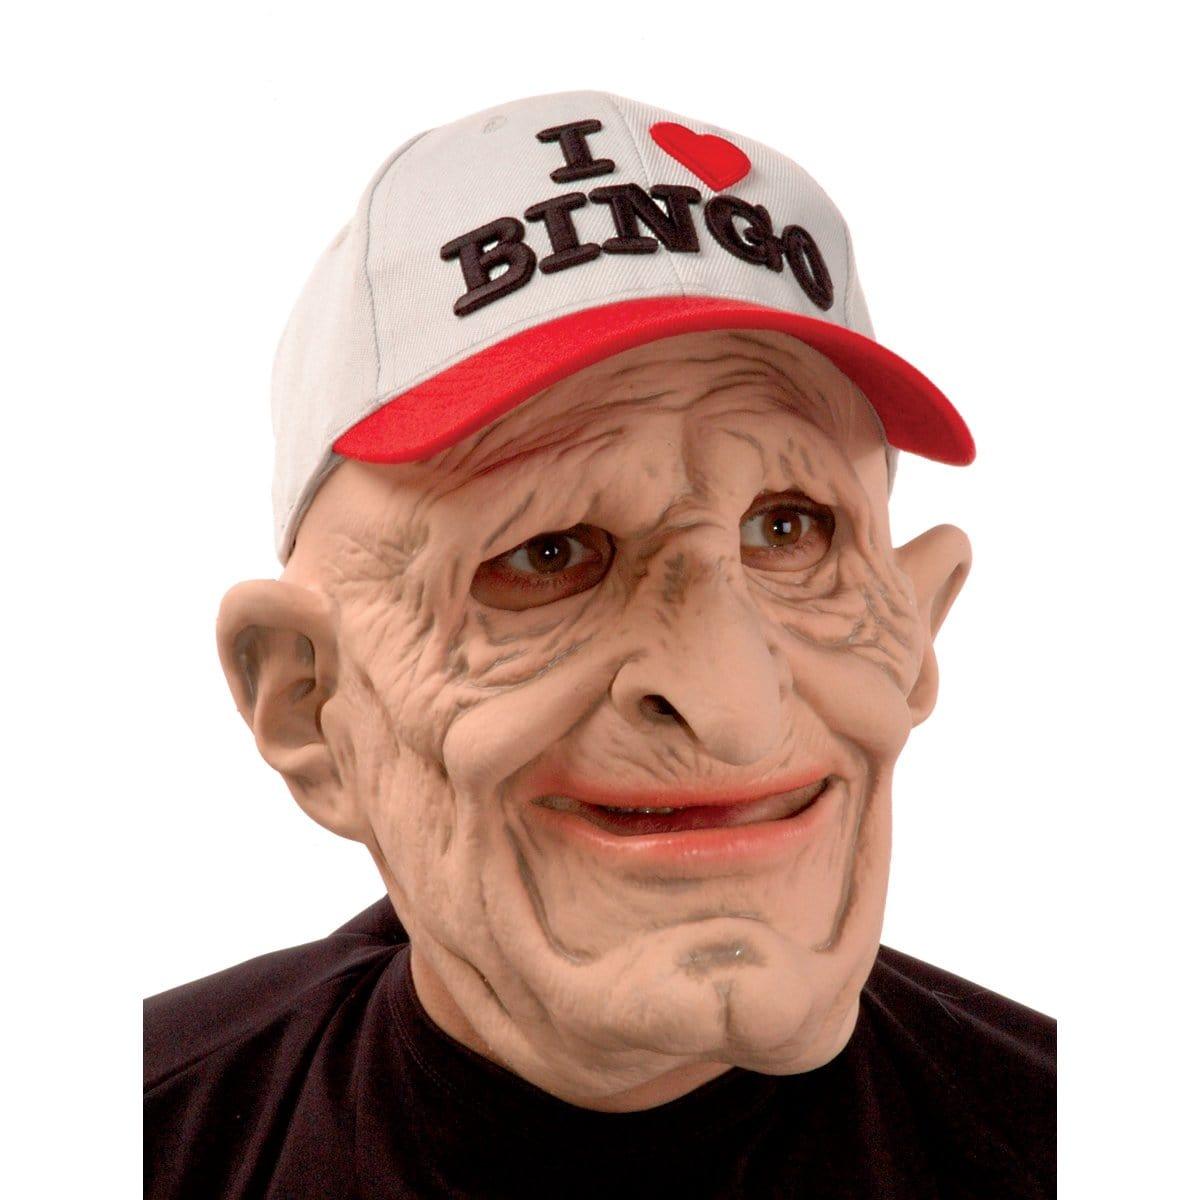 Buy Costume Accessories Be-nign bingo man mask sold at Party Expert